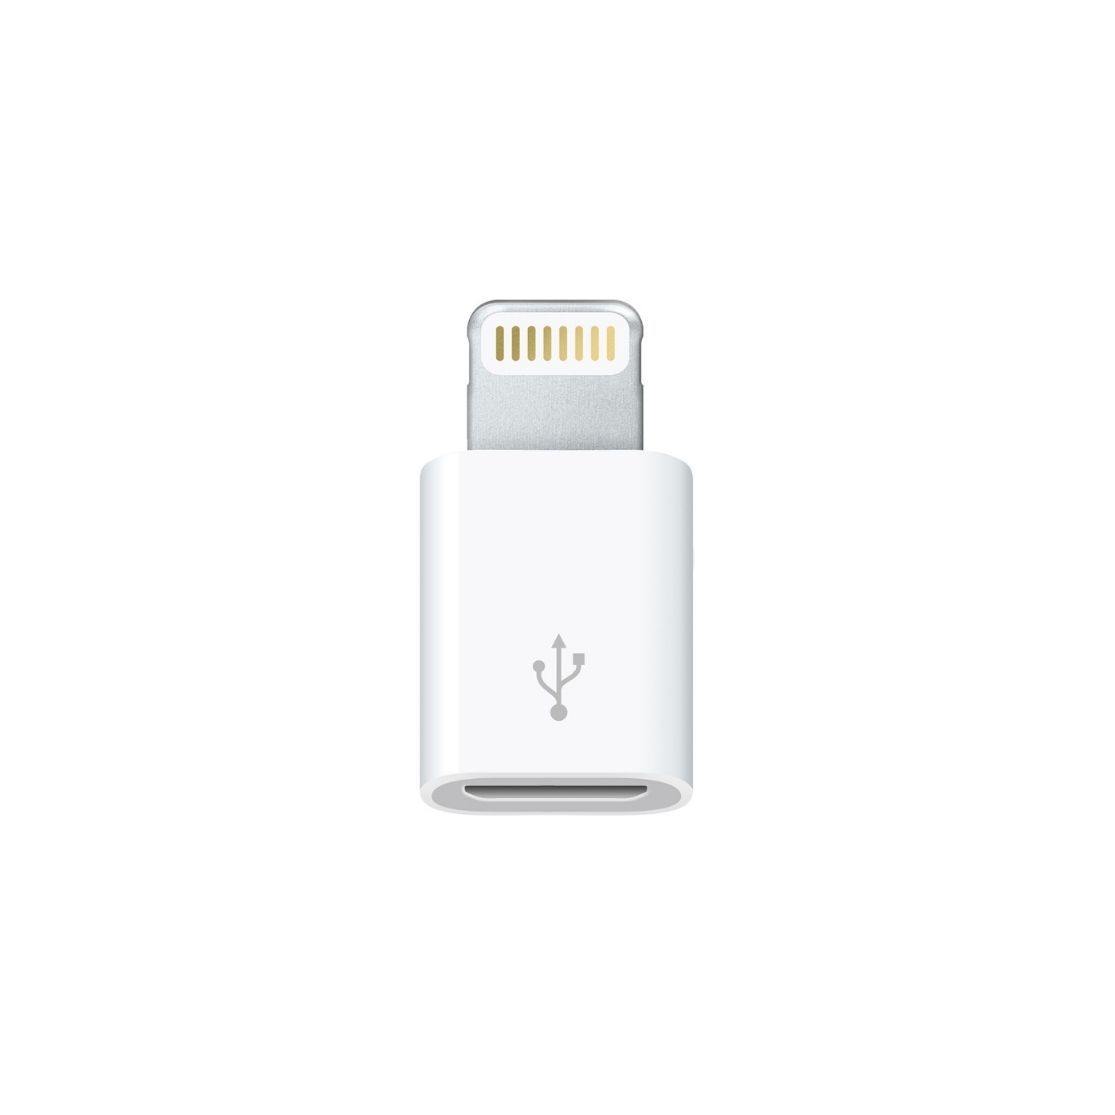 Apple Lightning to Micro USB Adapter | White - QuickTech.in